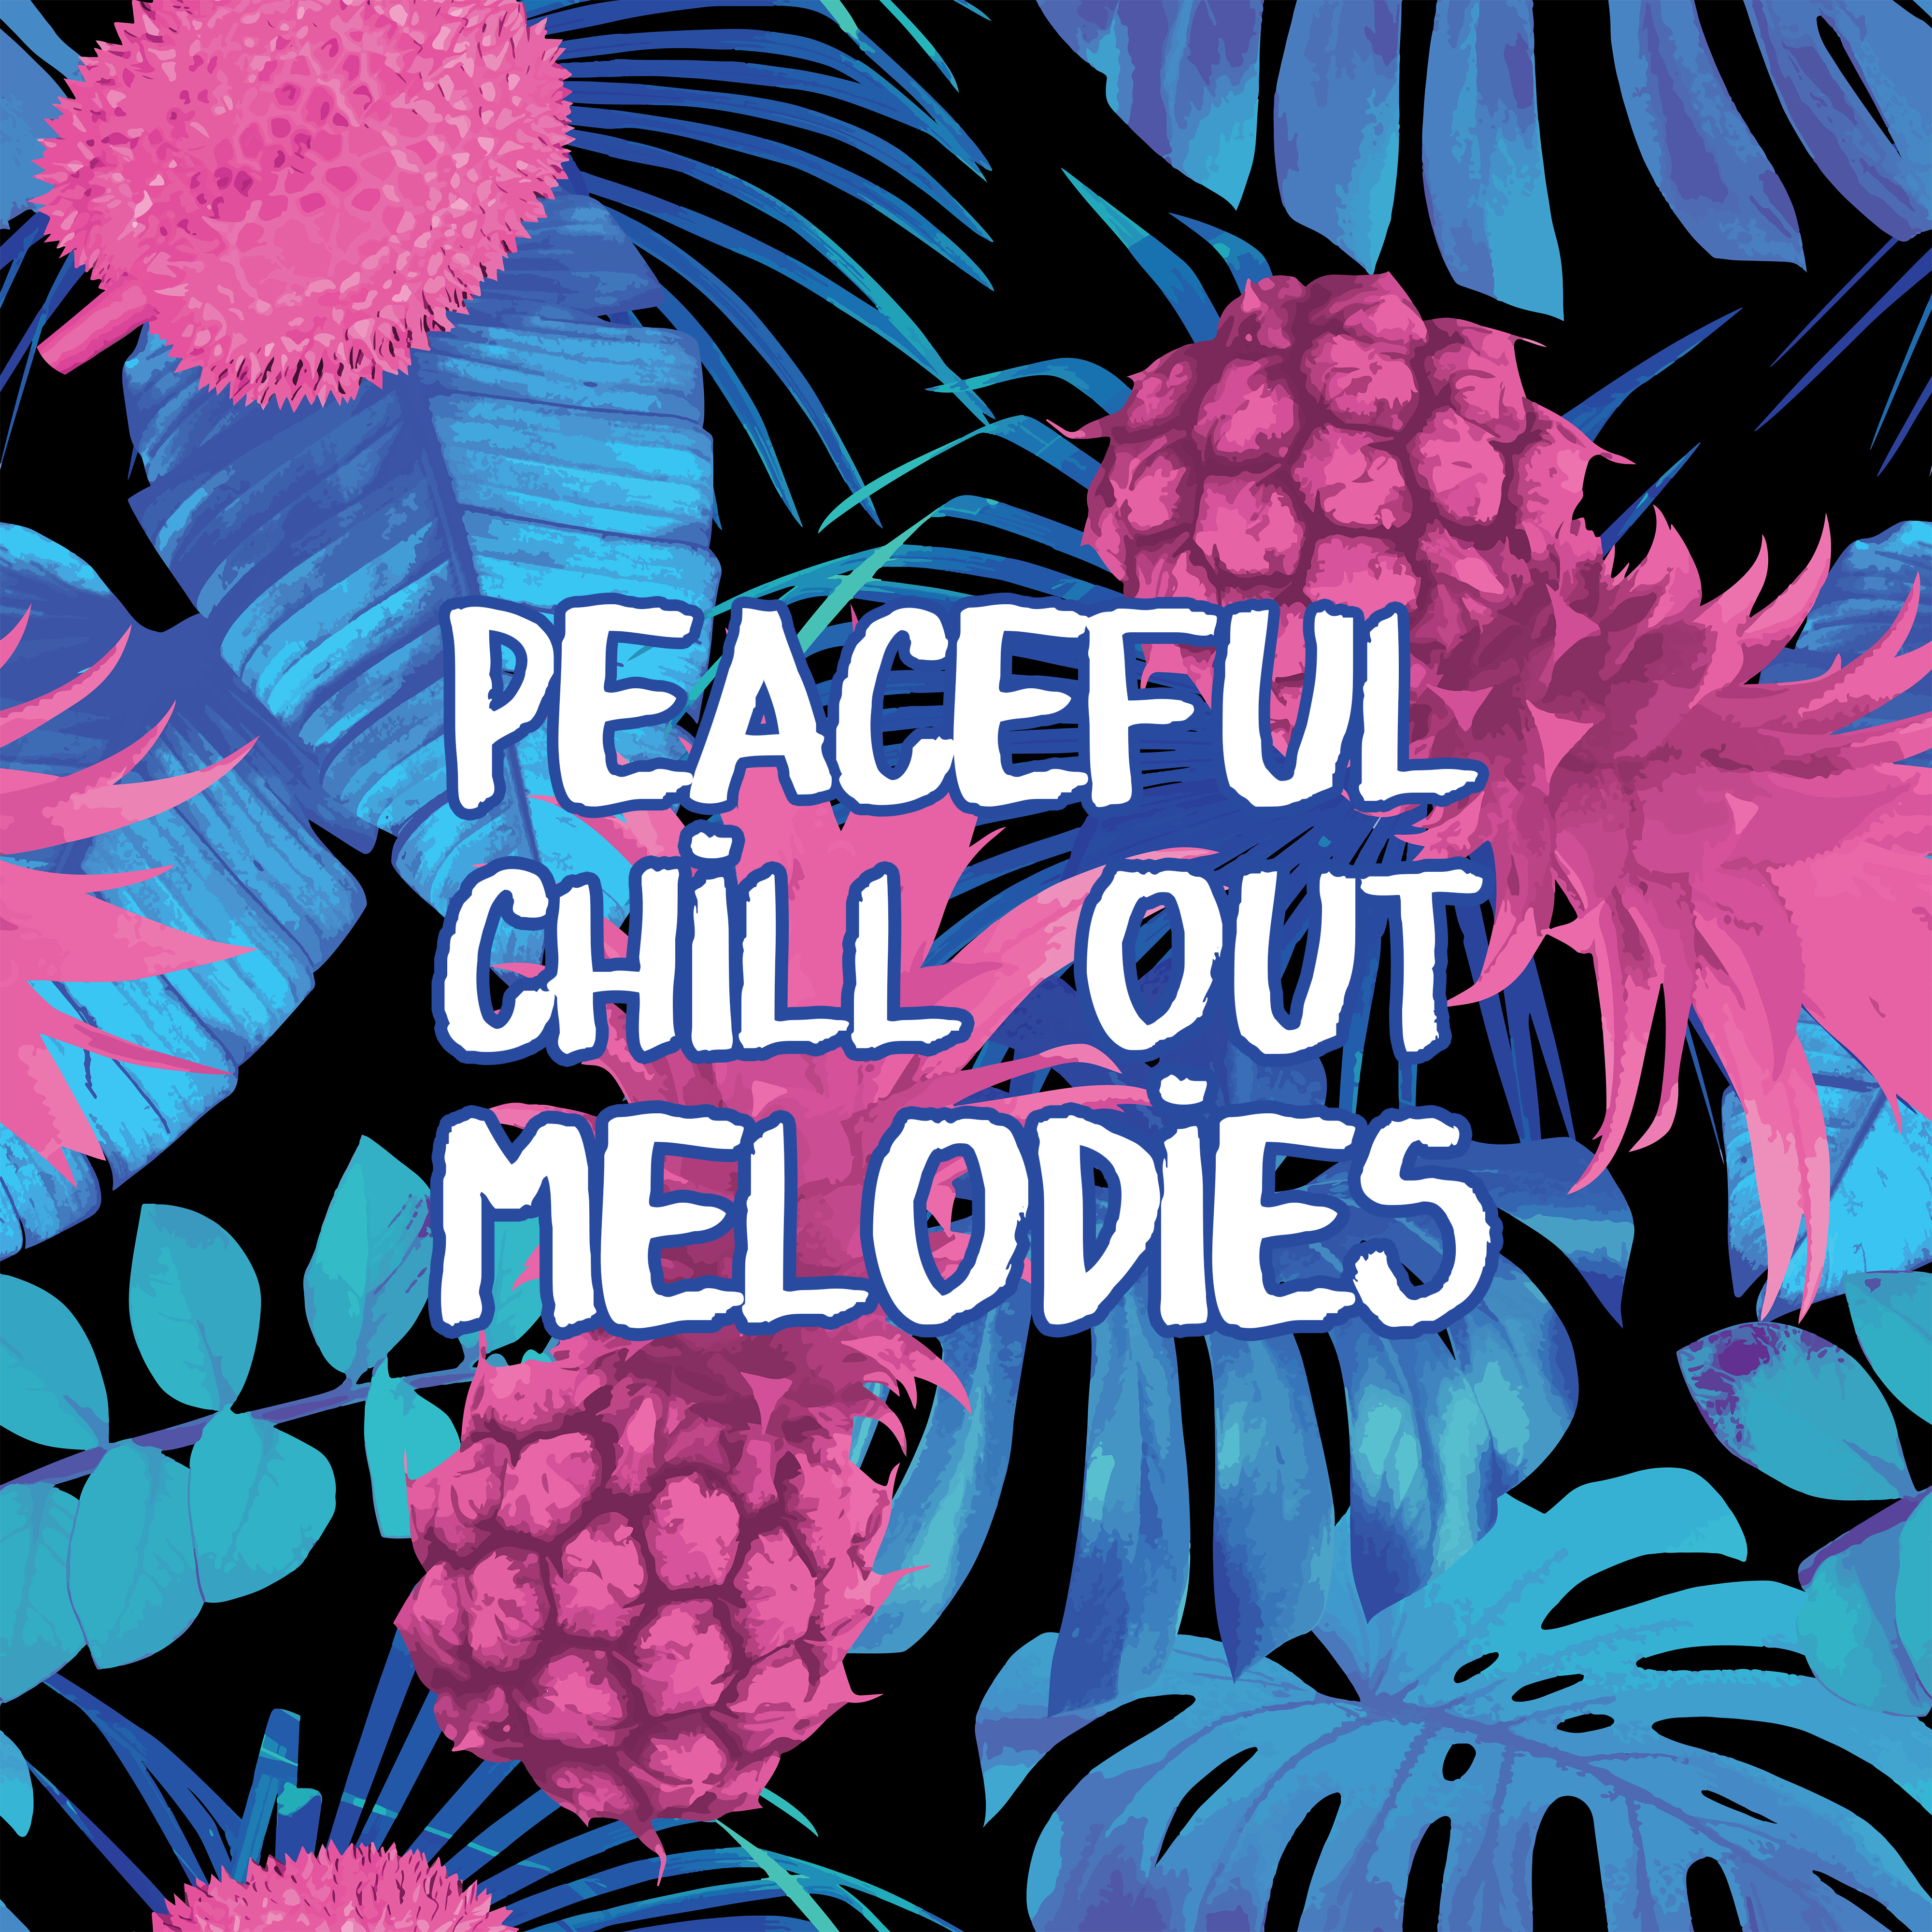 Peaceful Chill Out Melodies